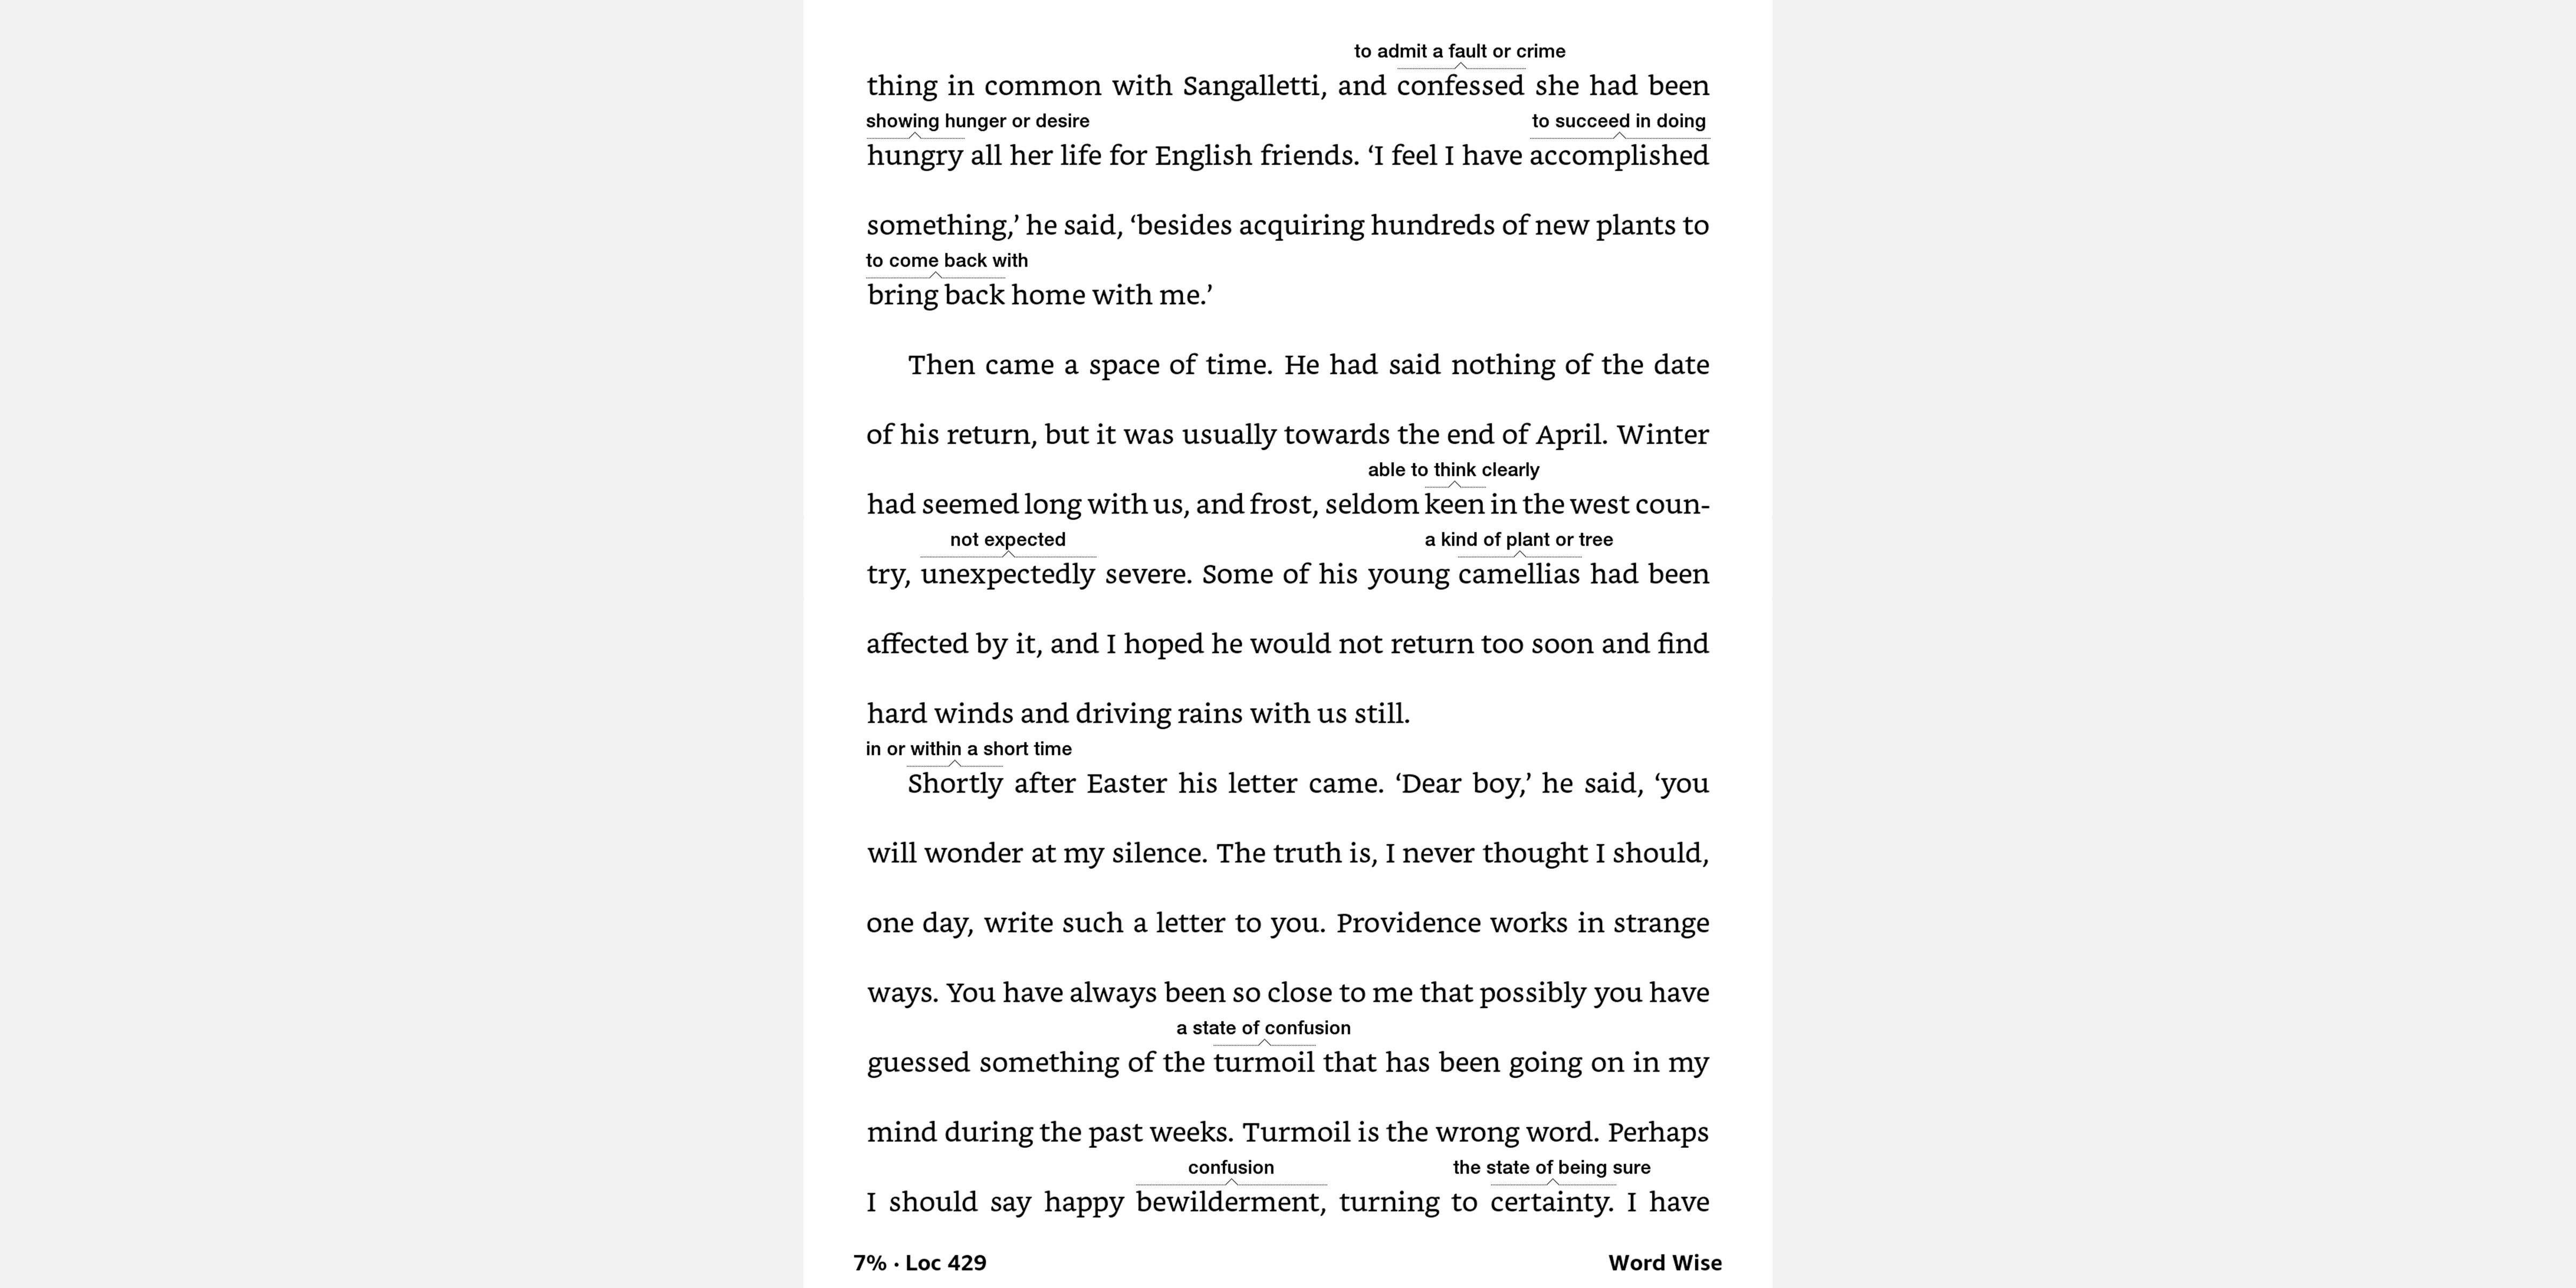 Screenshot of Amazon Kindle showing Word Wise function enabled